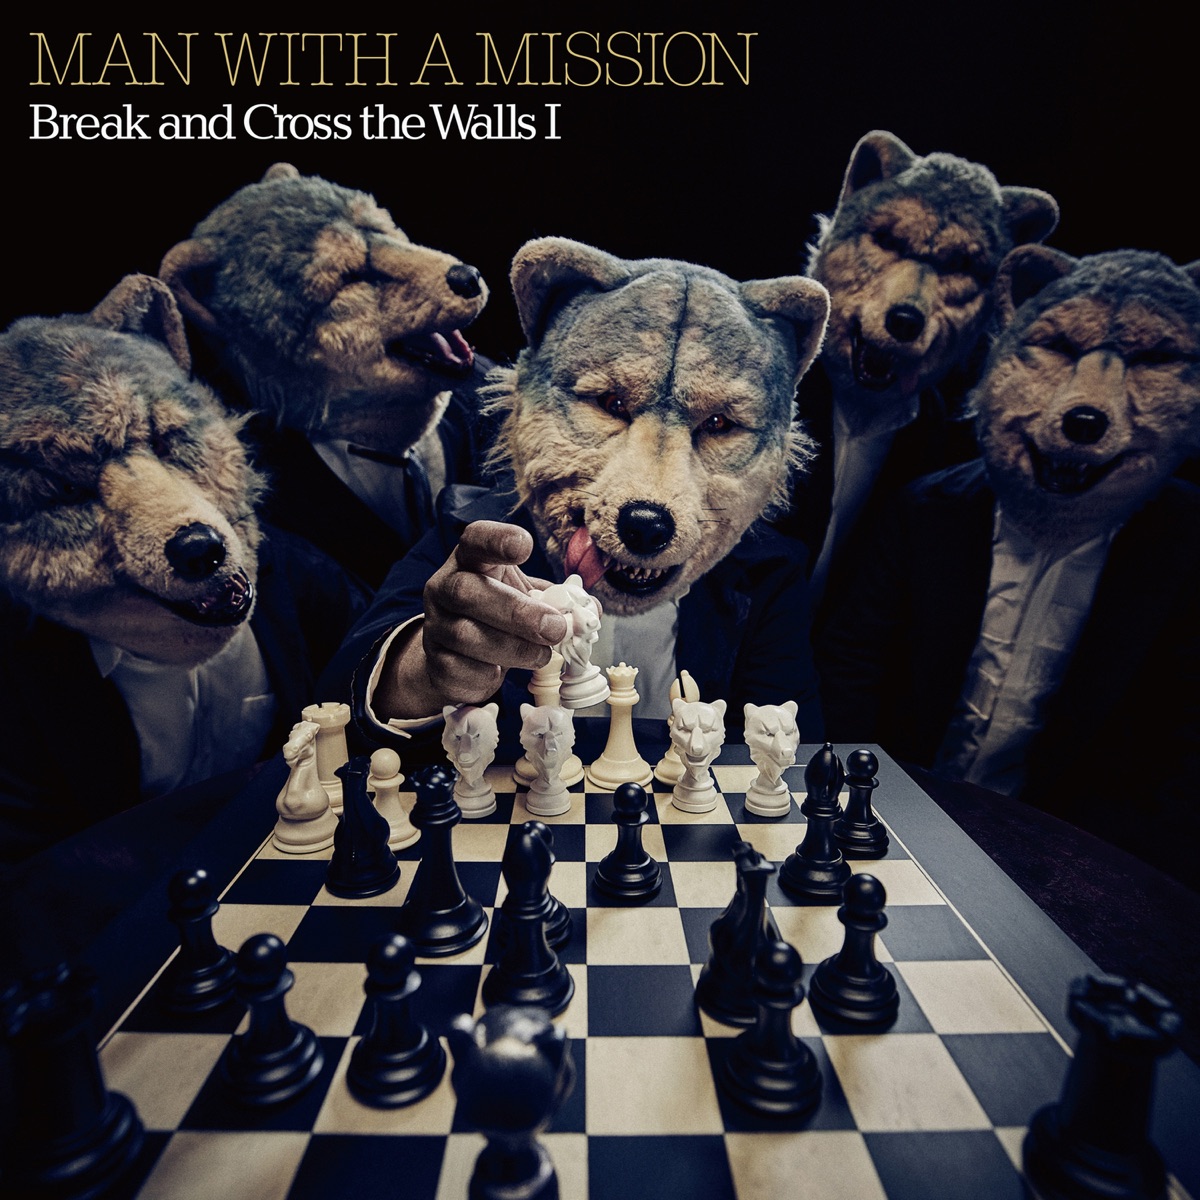 『MAN WITH A MISSION - Thunderstruck』収録の『Break and Cross the Walls Ⅰ』ジャケット